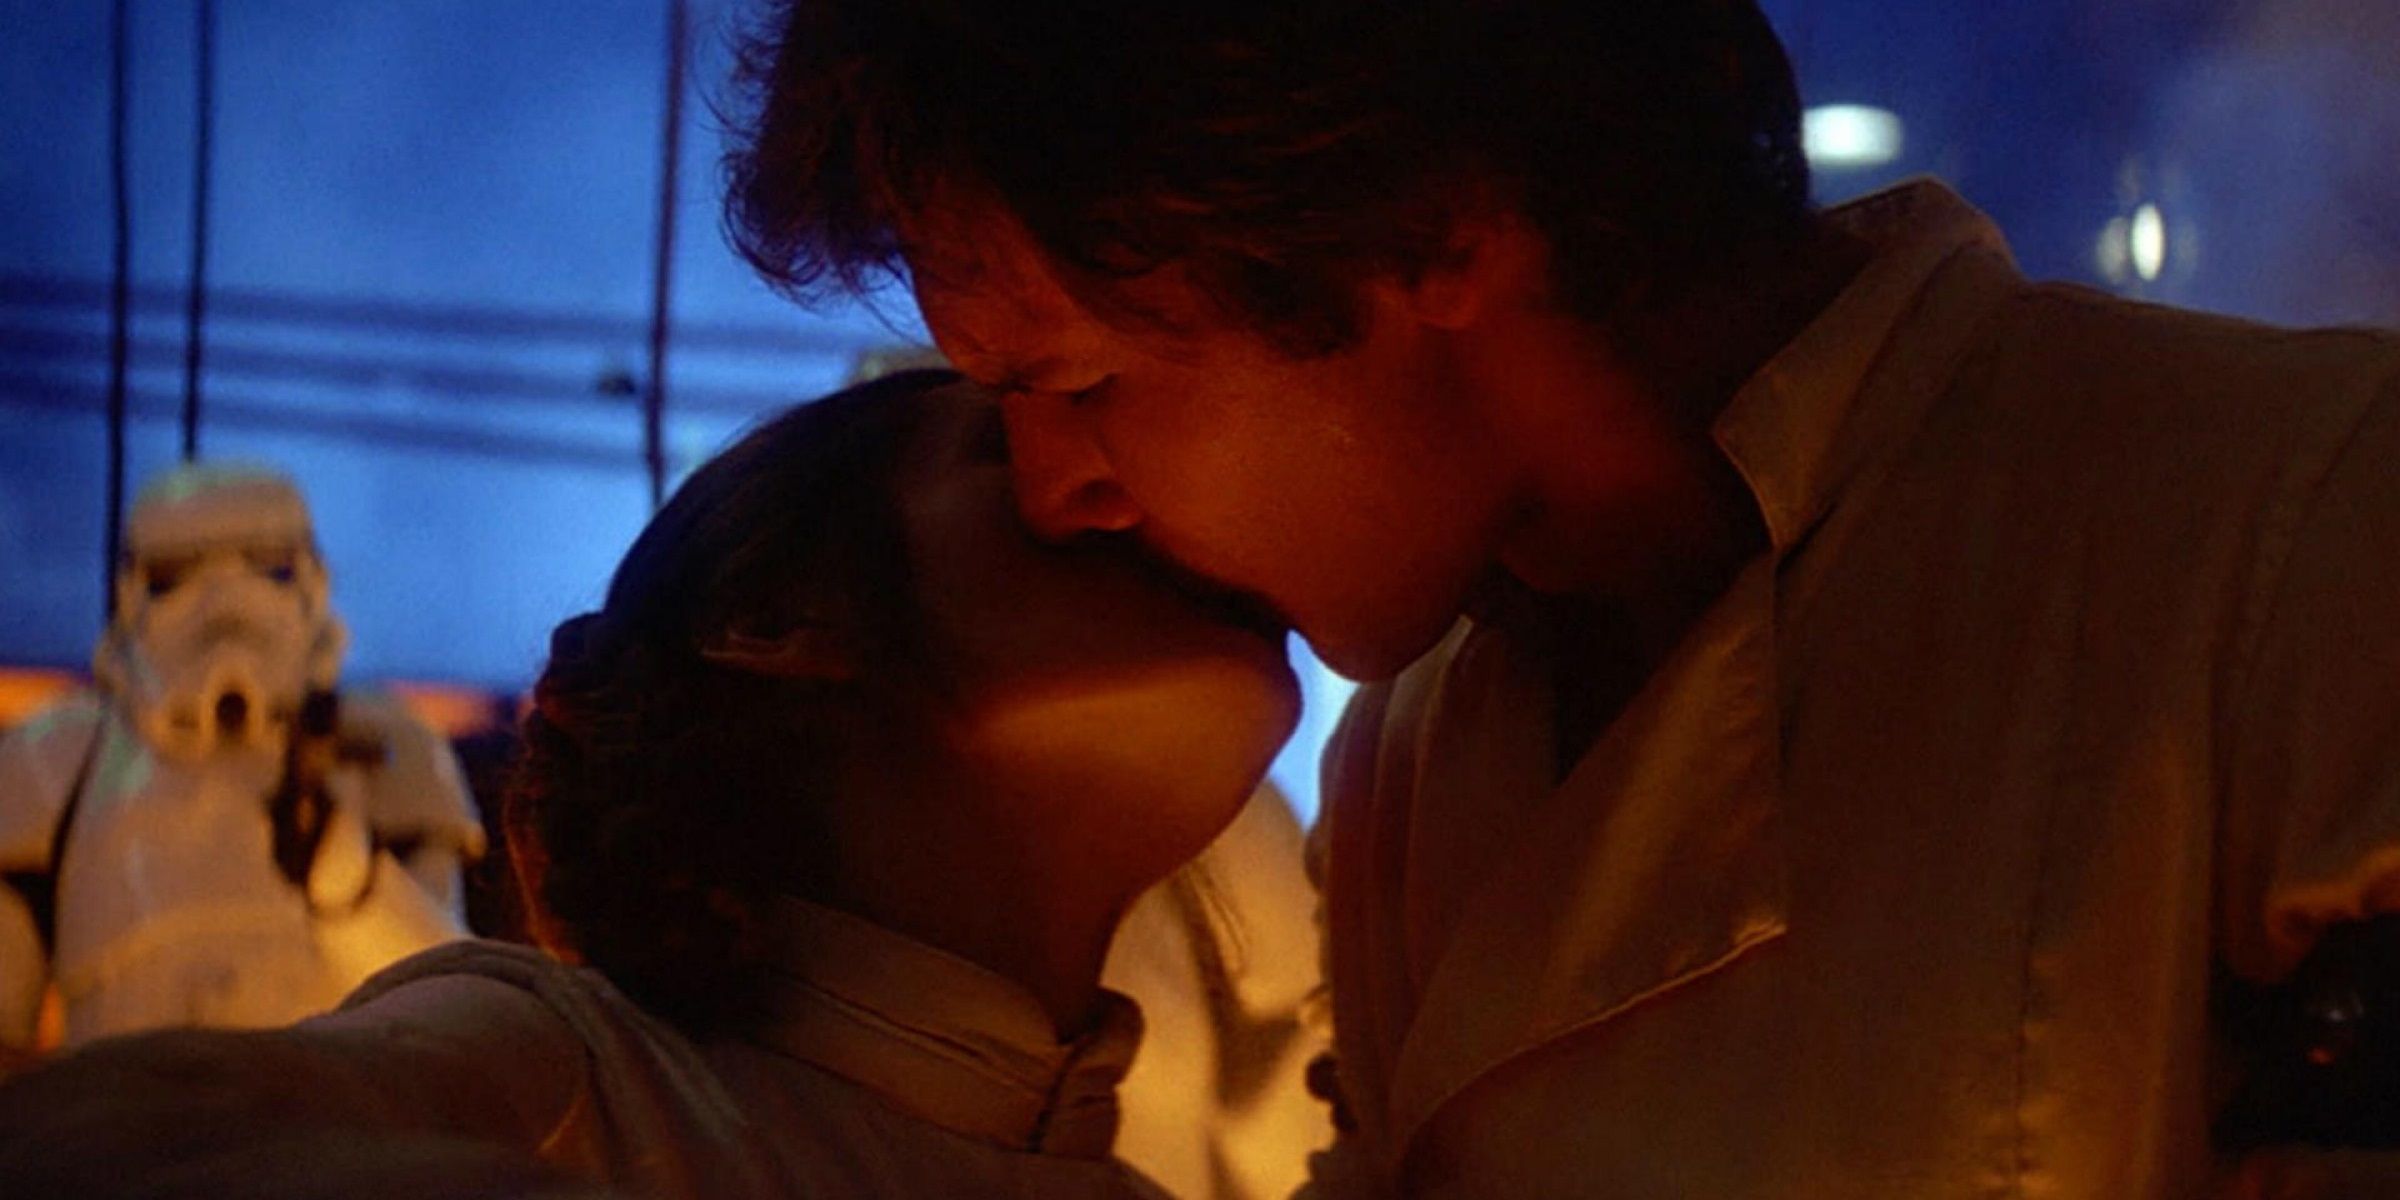 Han Solo and Leia Organa kiss on Bespin in Star Wars Empire Strikes Back